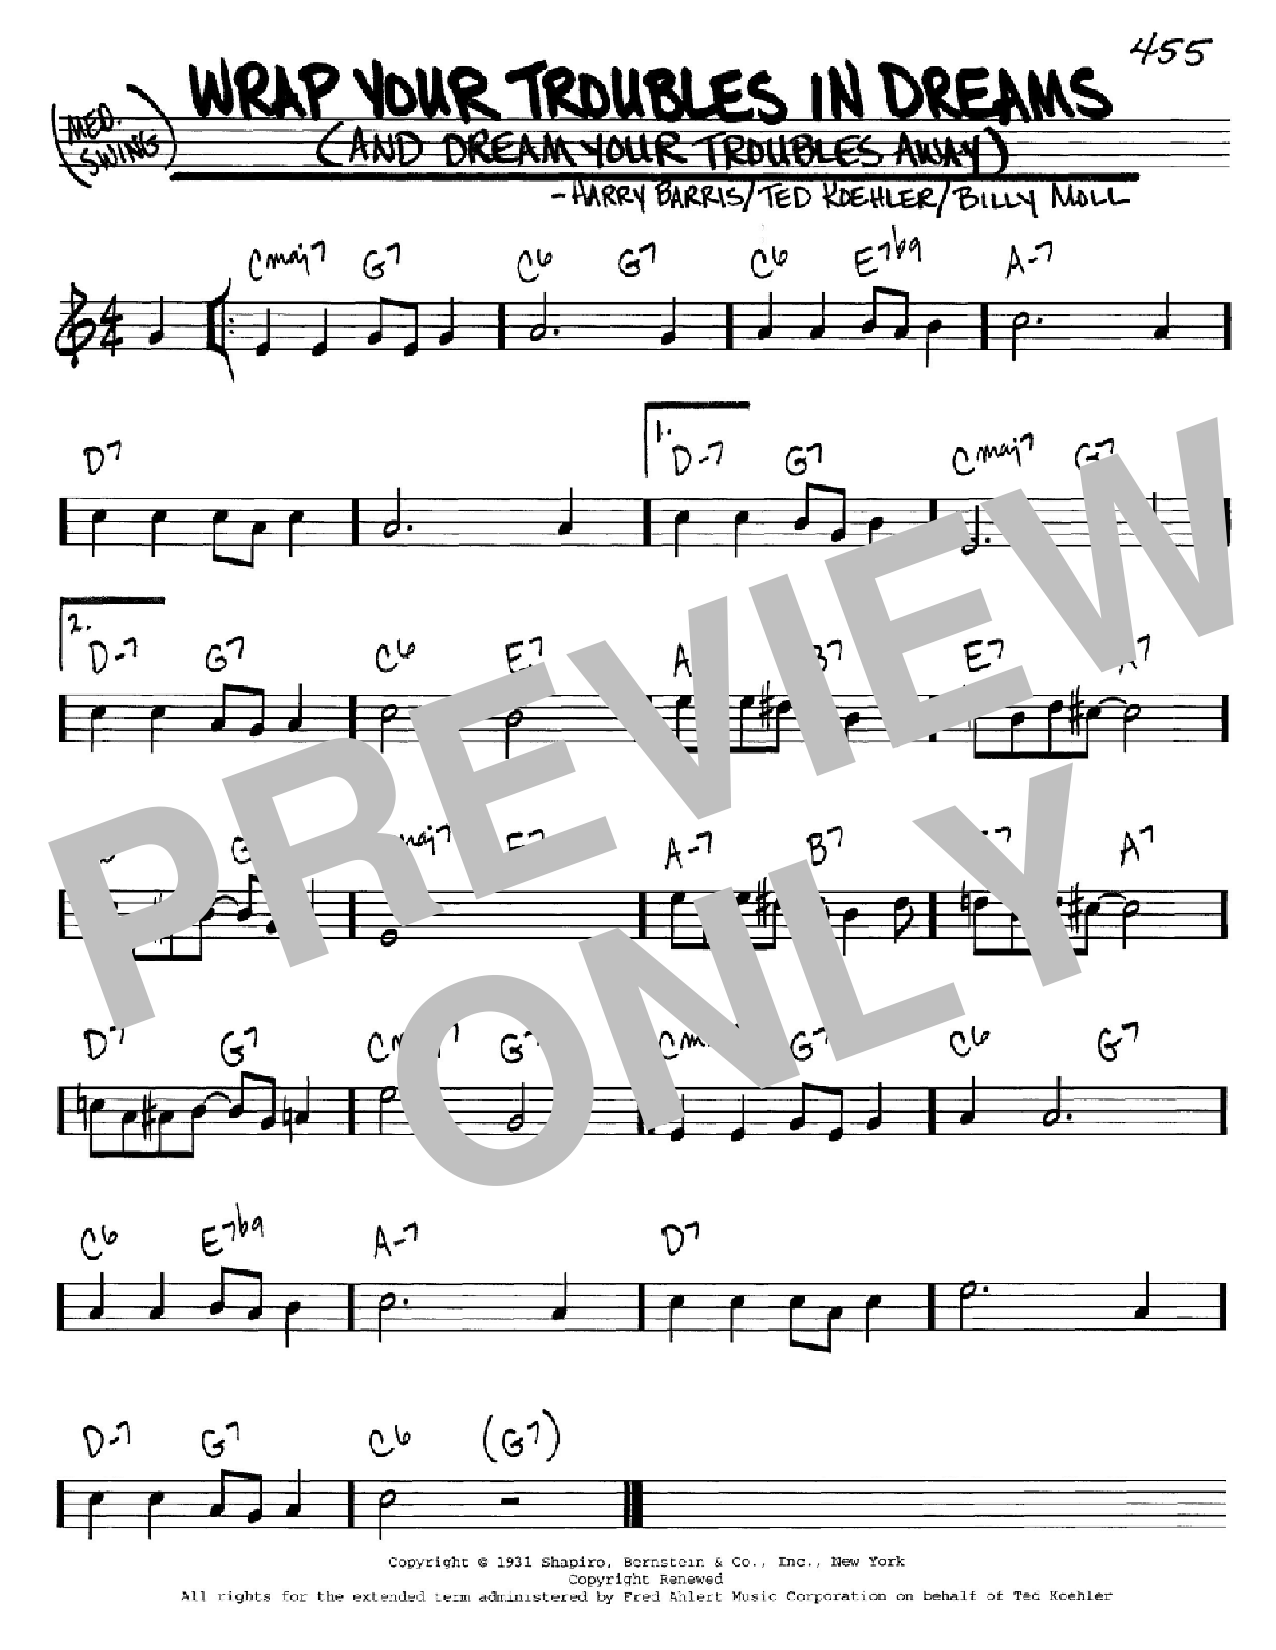 Download Ted Koehler Wrap Your Troubles In Dreams (And Dream Sheet Music